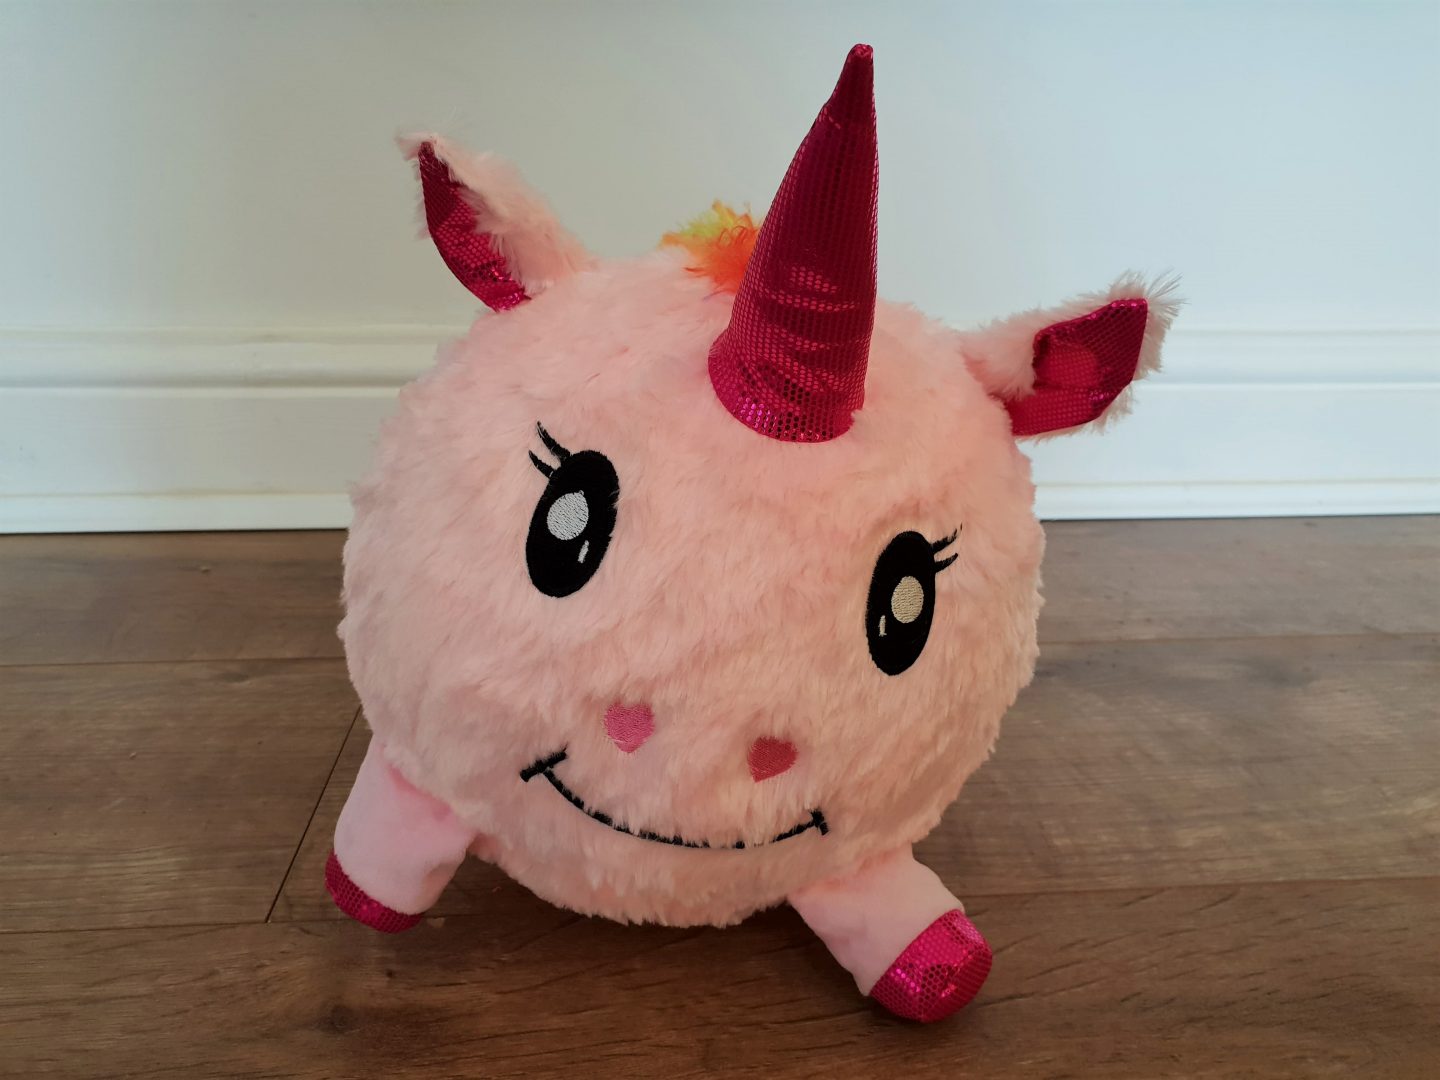 Fluffy pink unicorn ball from Smyths Toys at South Aylesford Retail Park